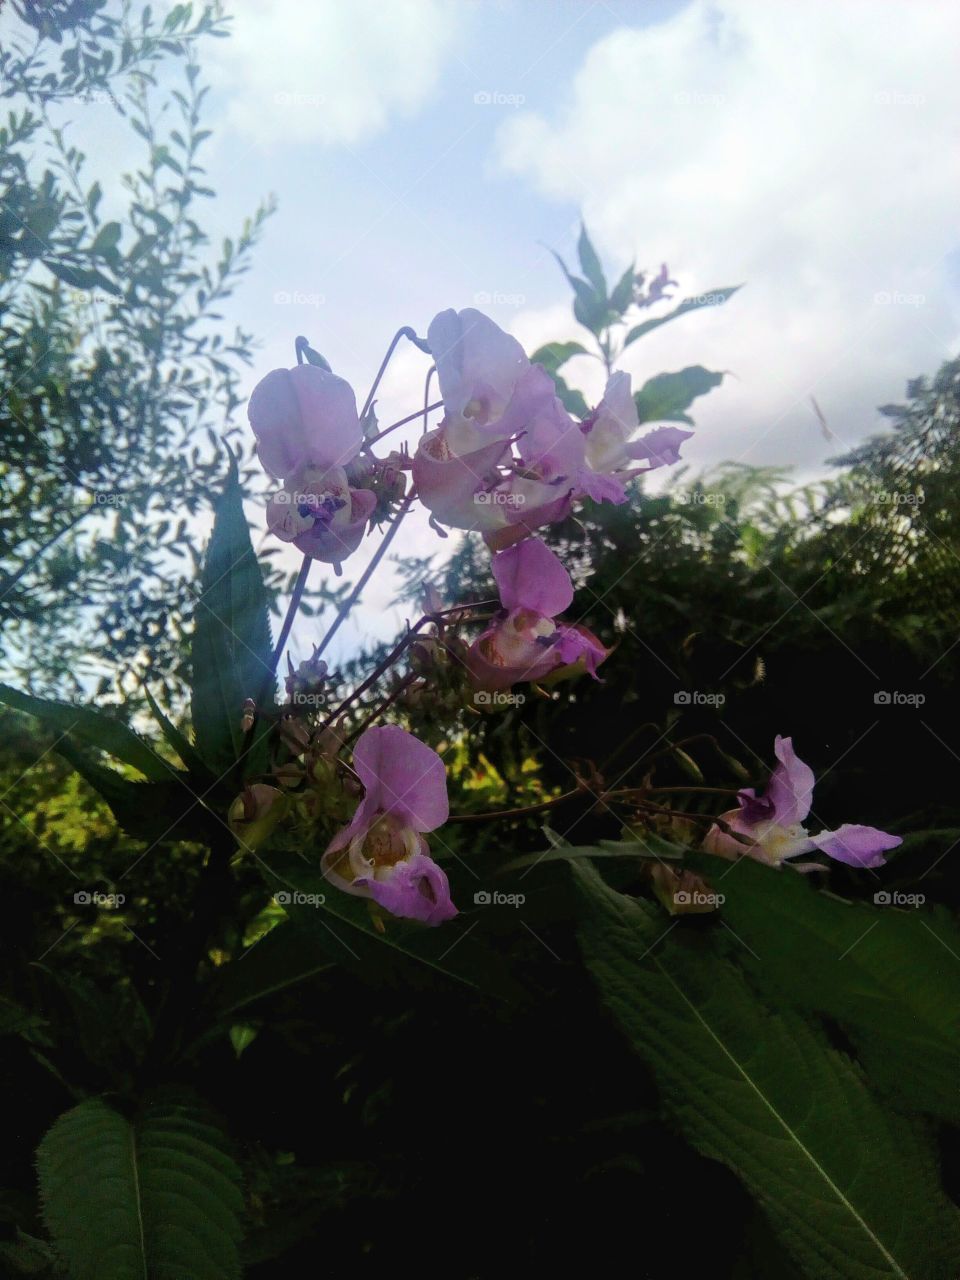 I was on a walk, and found these pink flowers: they were tiny, but grew so high and I thought it was unusual